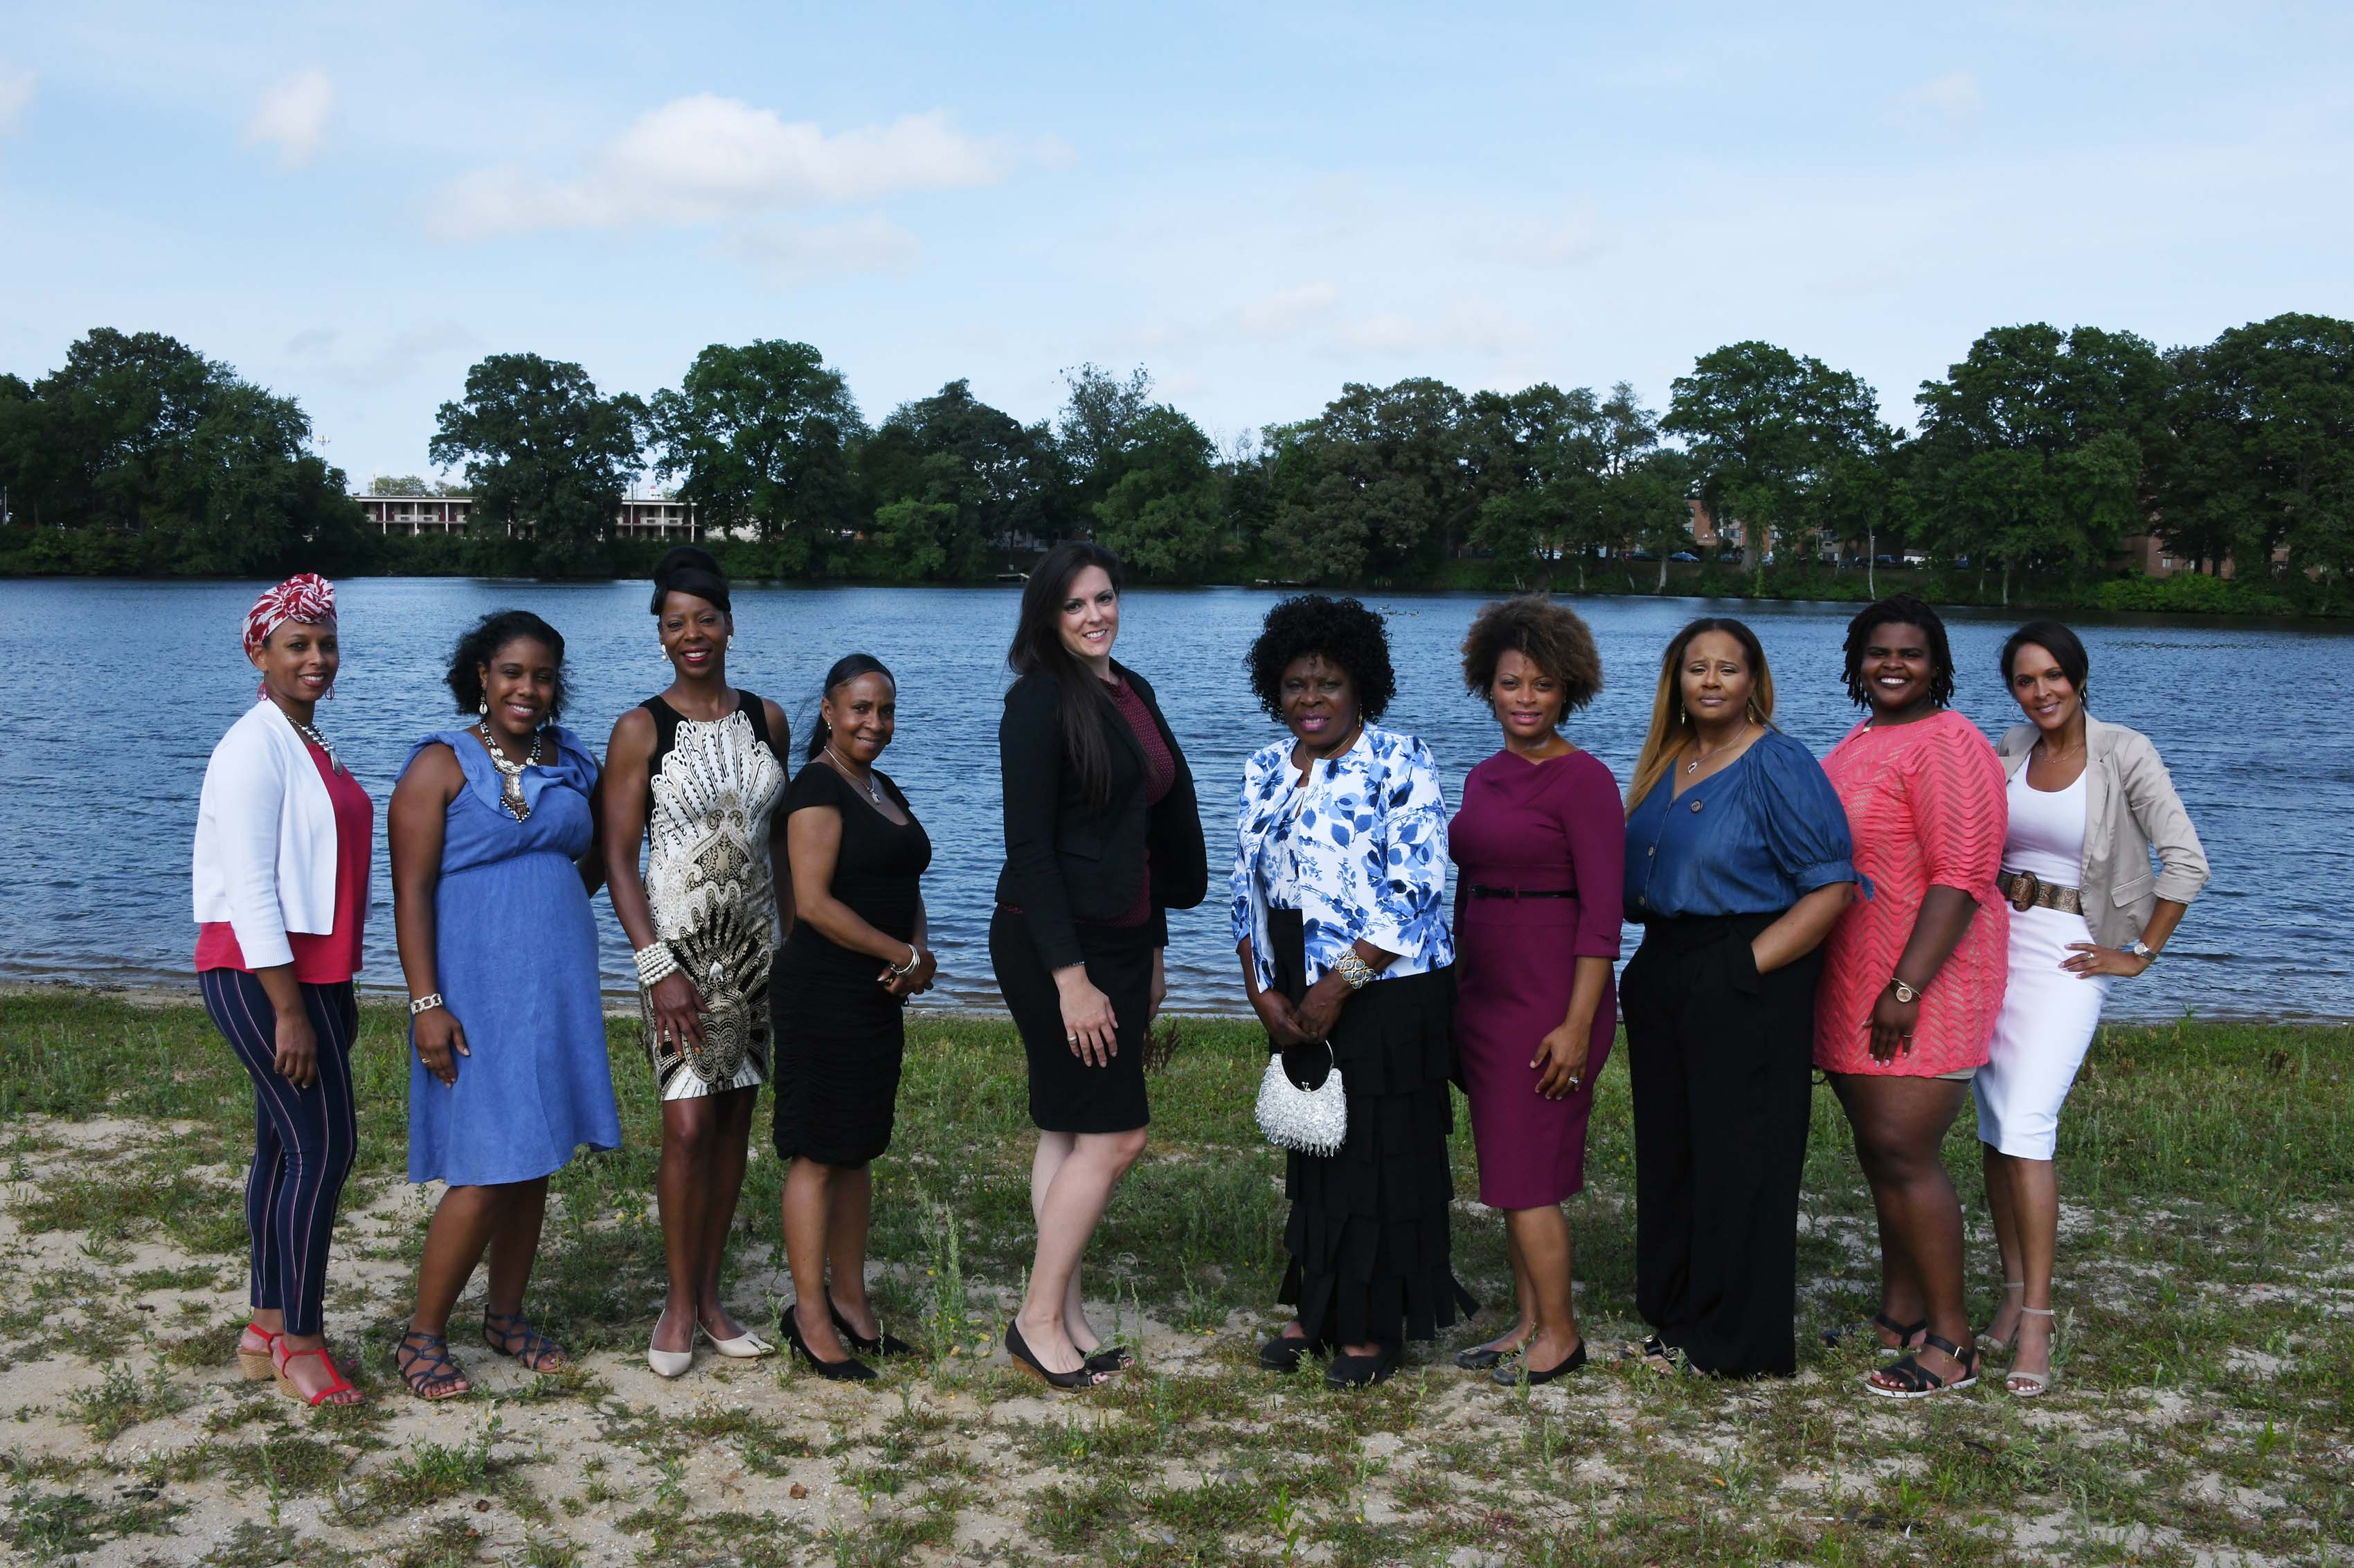 (L-r) Nyia McCants, Shanita Powell, Brenda Farmer, Phyllis Riley Coleman, Ann Knetter, Helen Eyong, Adrienne Clarke, Georgeann Sturgis, Tiffany Lomax and Dawn M. Mosley all successfully defended their Ed.D. dissertations virtually. These doctoral candidates removed their masks for just a minute to take this photo.  Not pictured: Angela Thompson.
